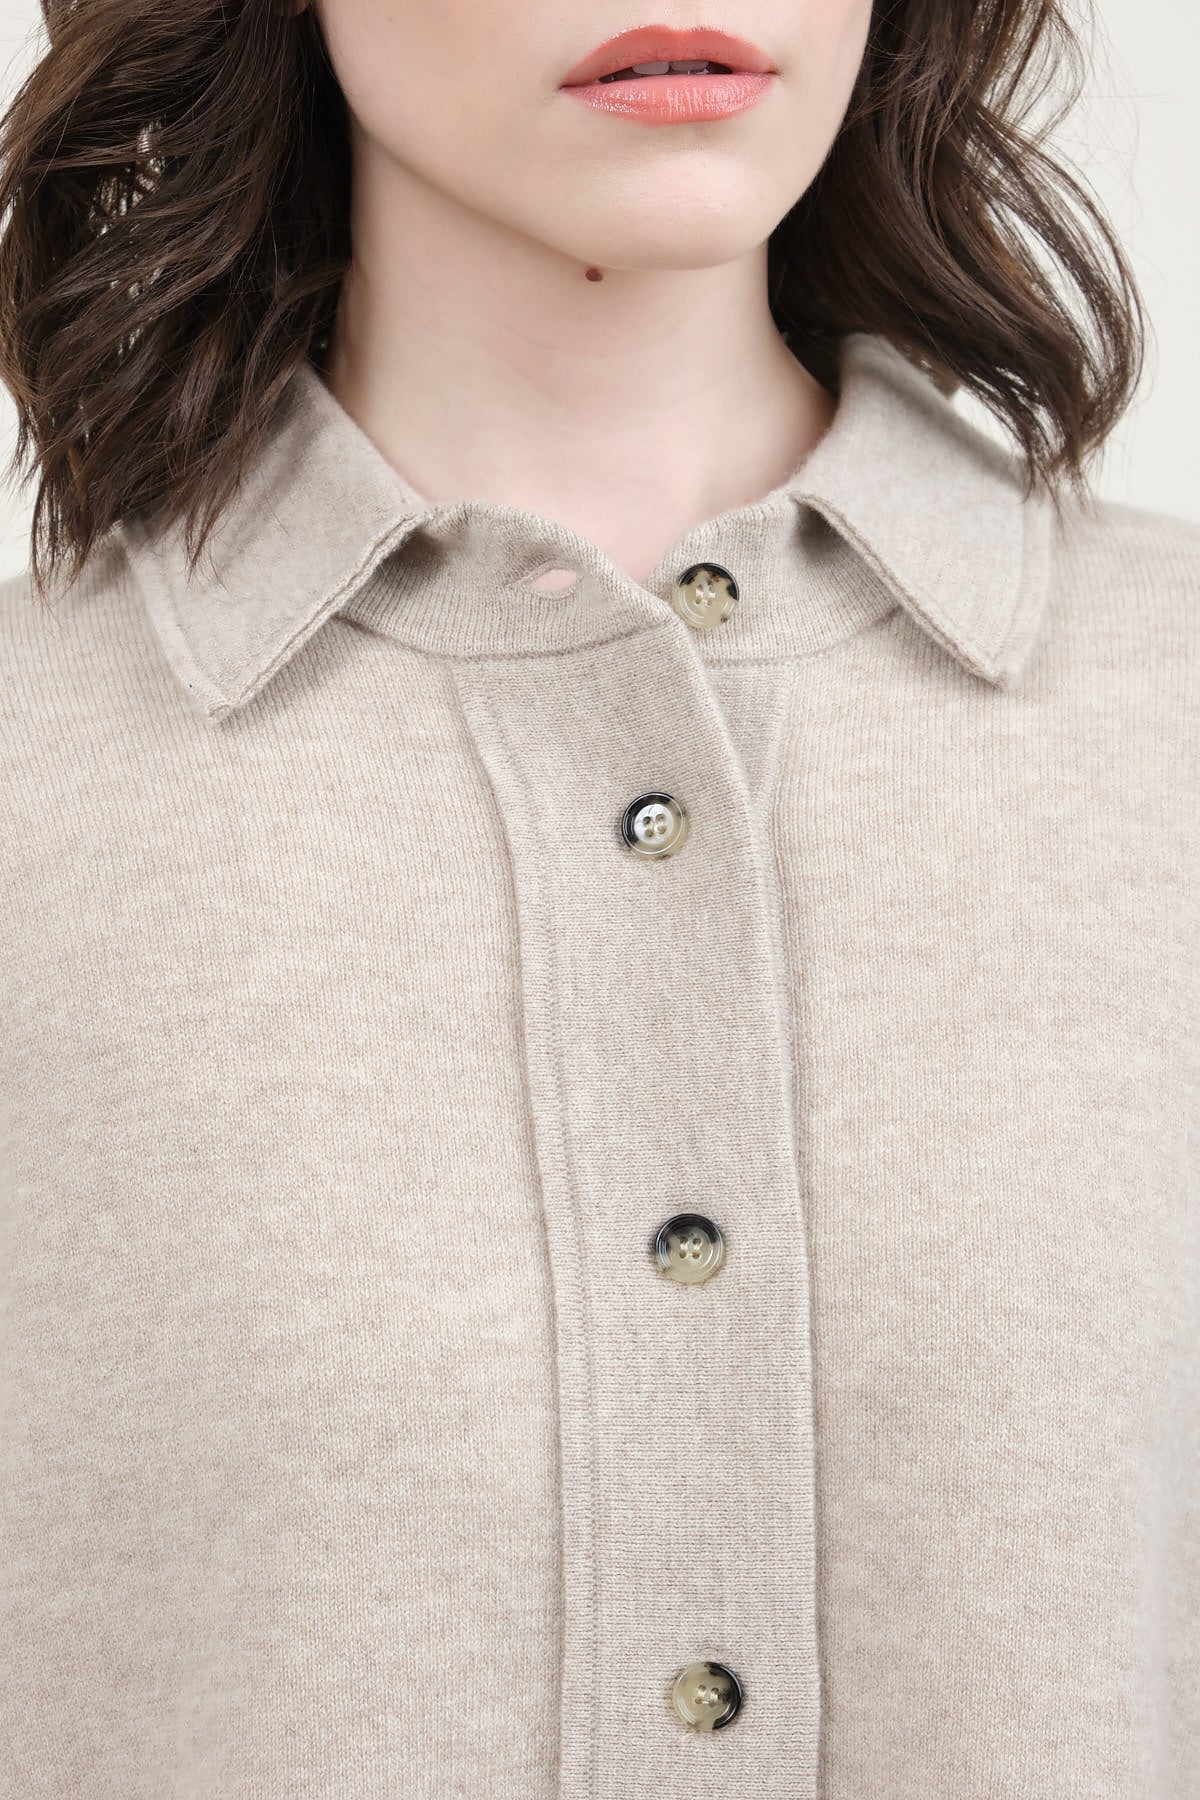 Placket on Shirt Jacket in Tan